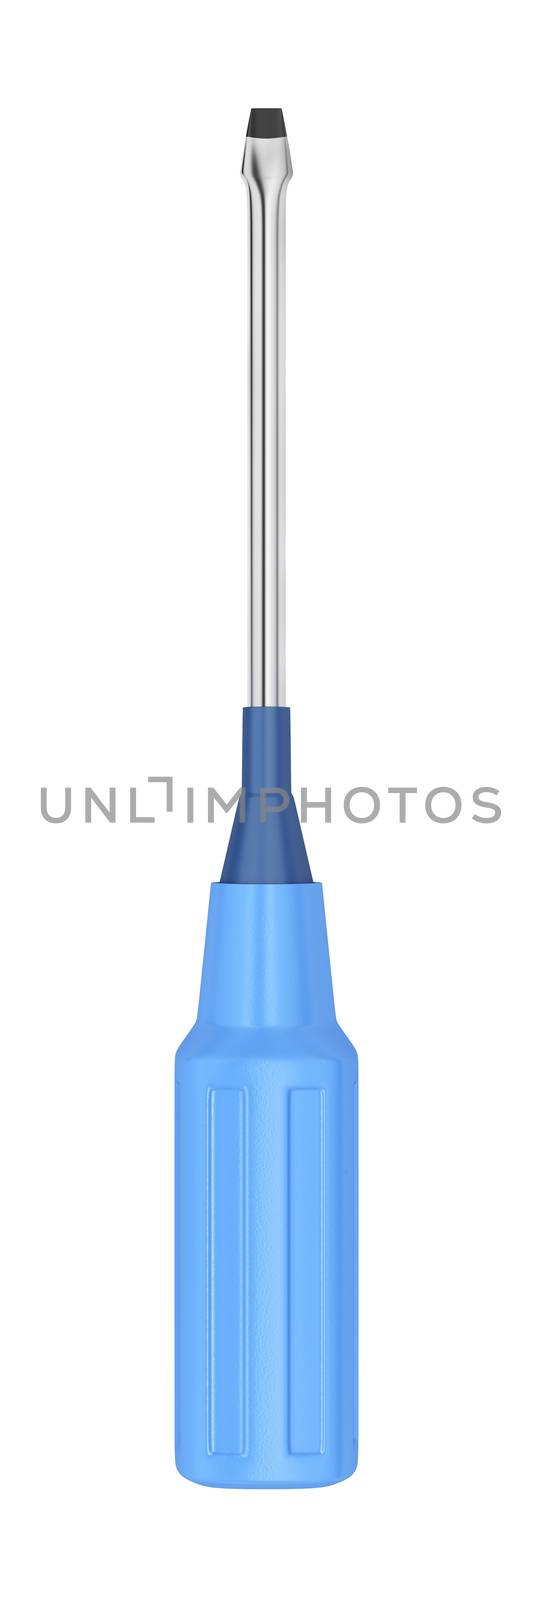 Blue screwdriver isolated on white background